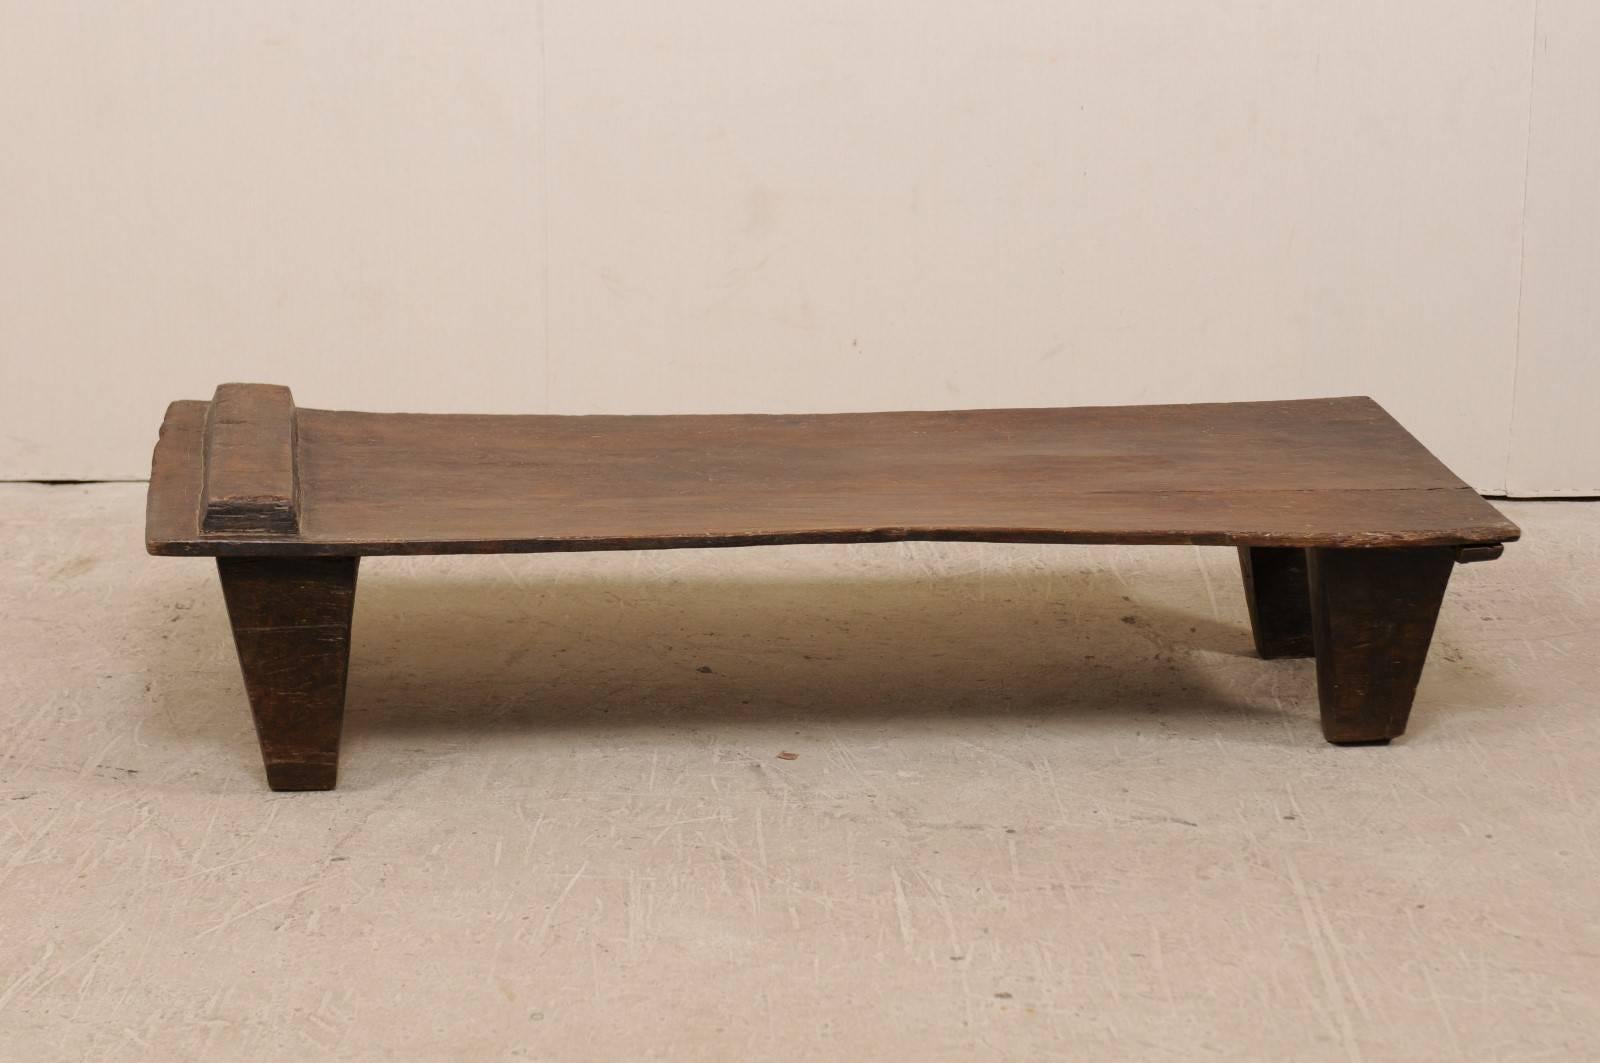 Primitive Rustic Naga Wood Coffee Table from the Early 20th Century, India 1